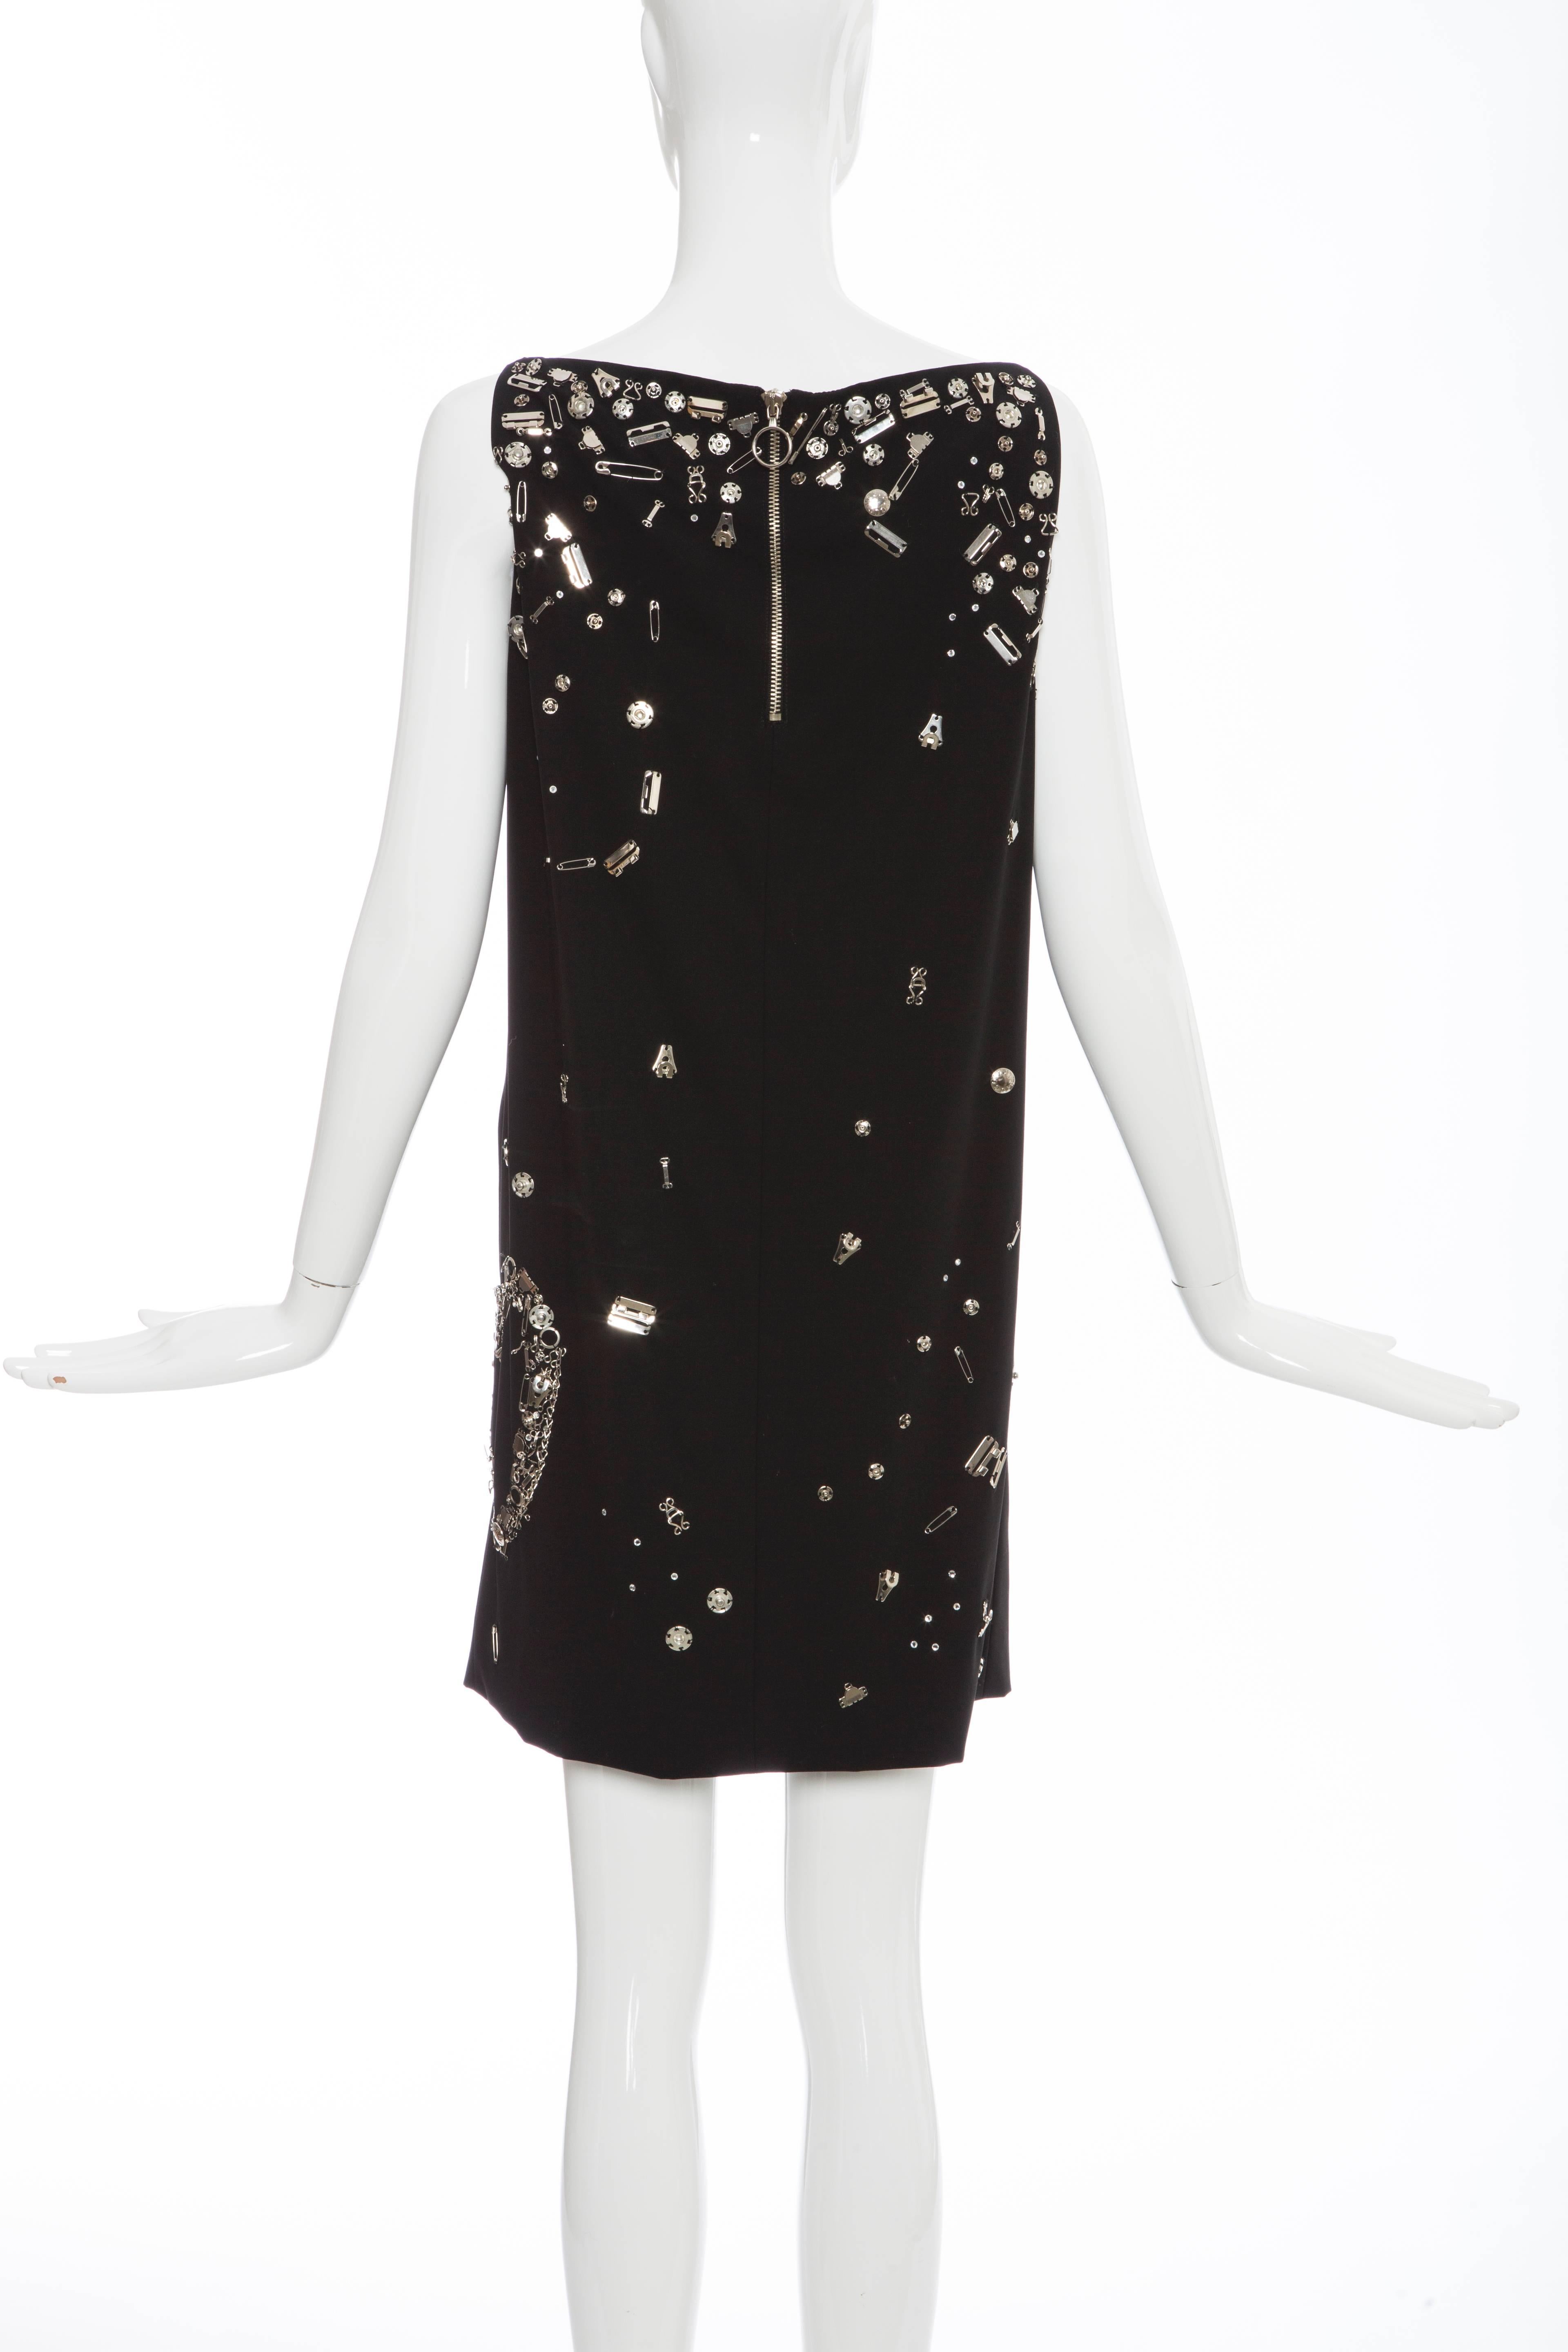 Women's Moschino Couture Runway Black Sleeveless Safety Pin Embellished Dress, Fall 2009